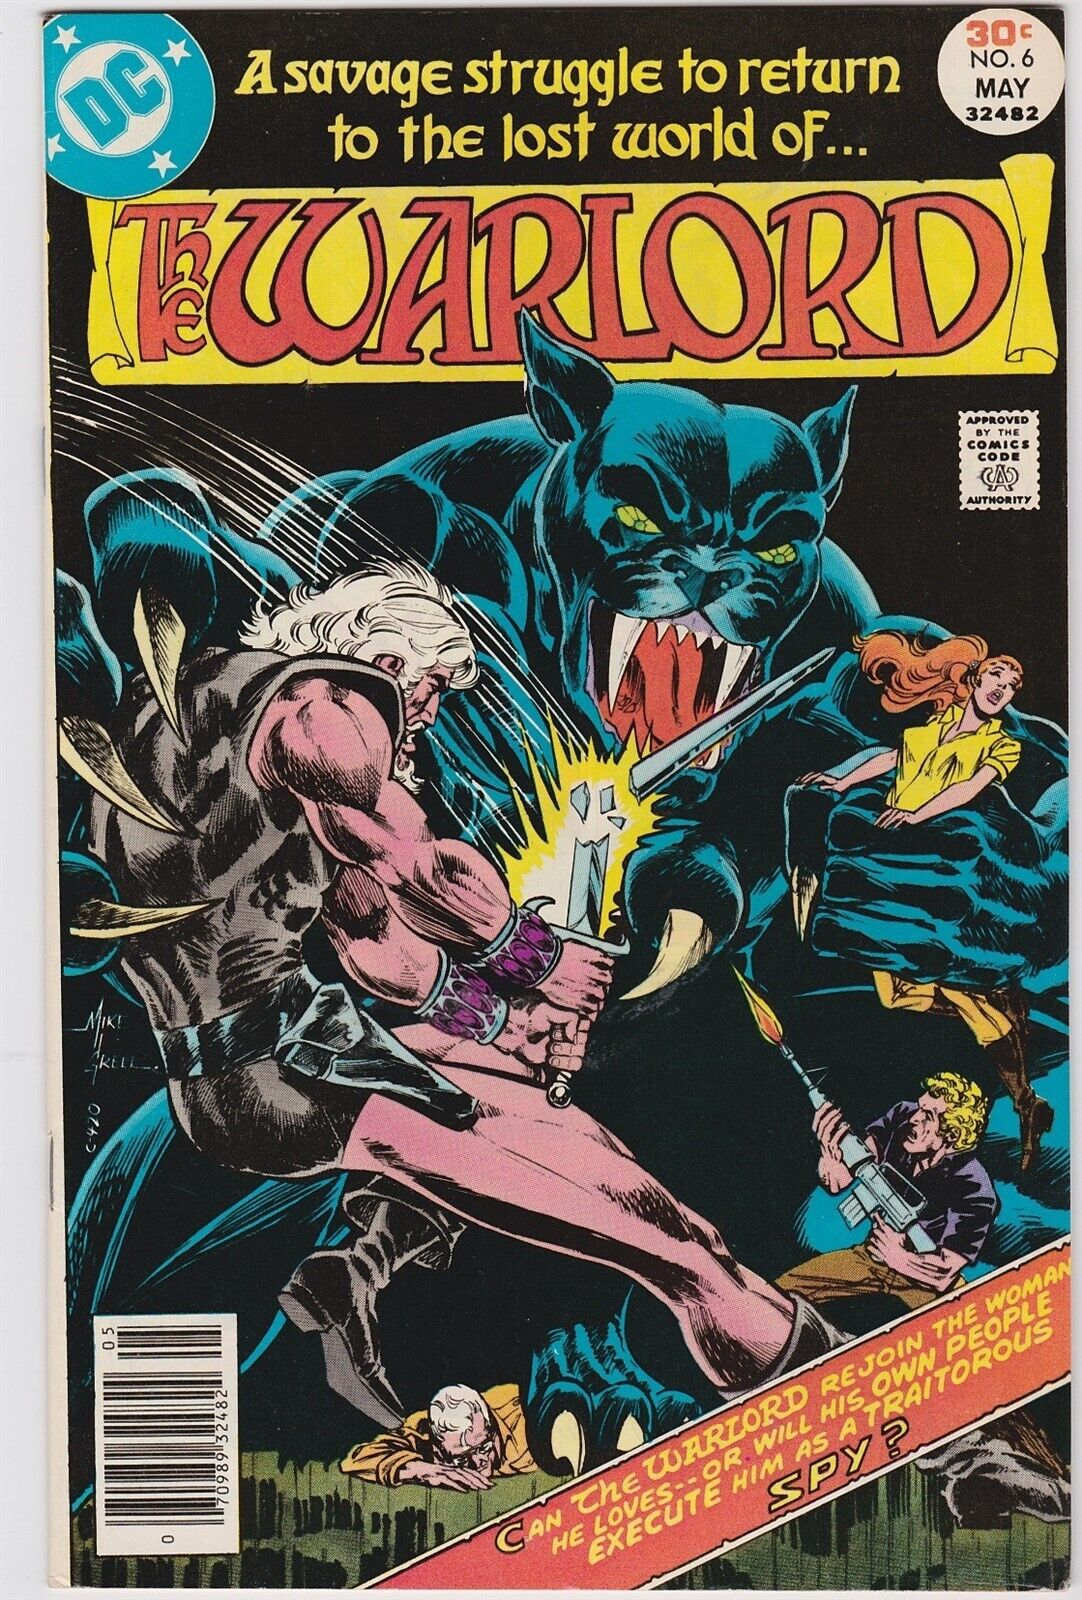 WARLORD #6 MAY 1977 VERY FINE PLUS CONDITION DC CLASSIC